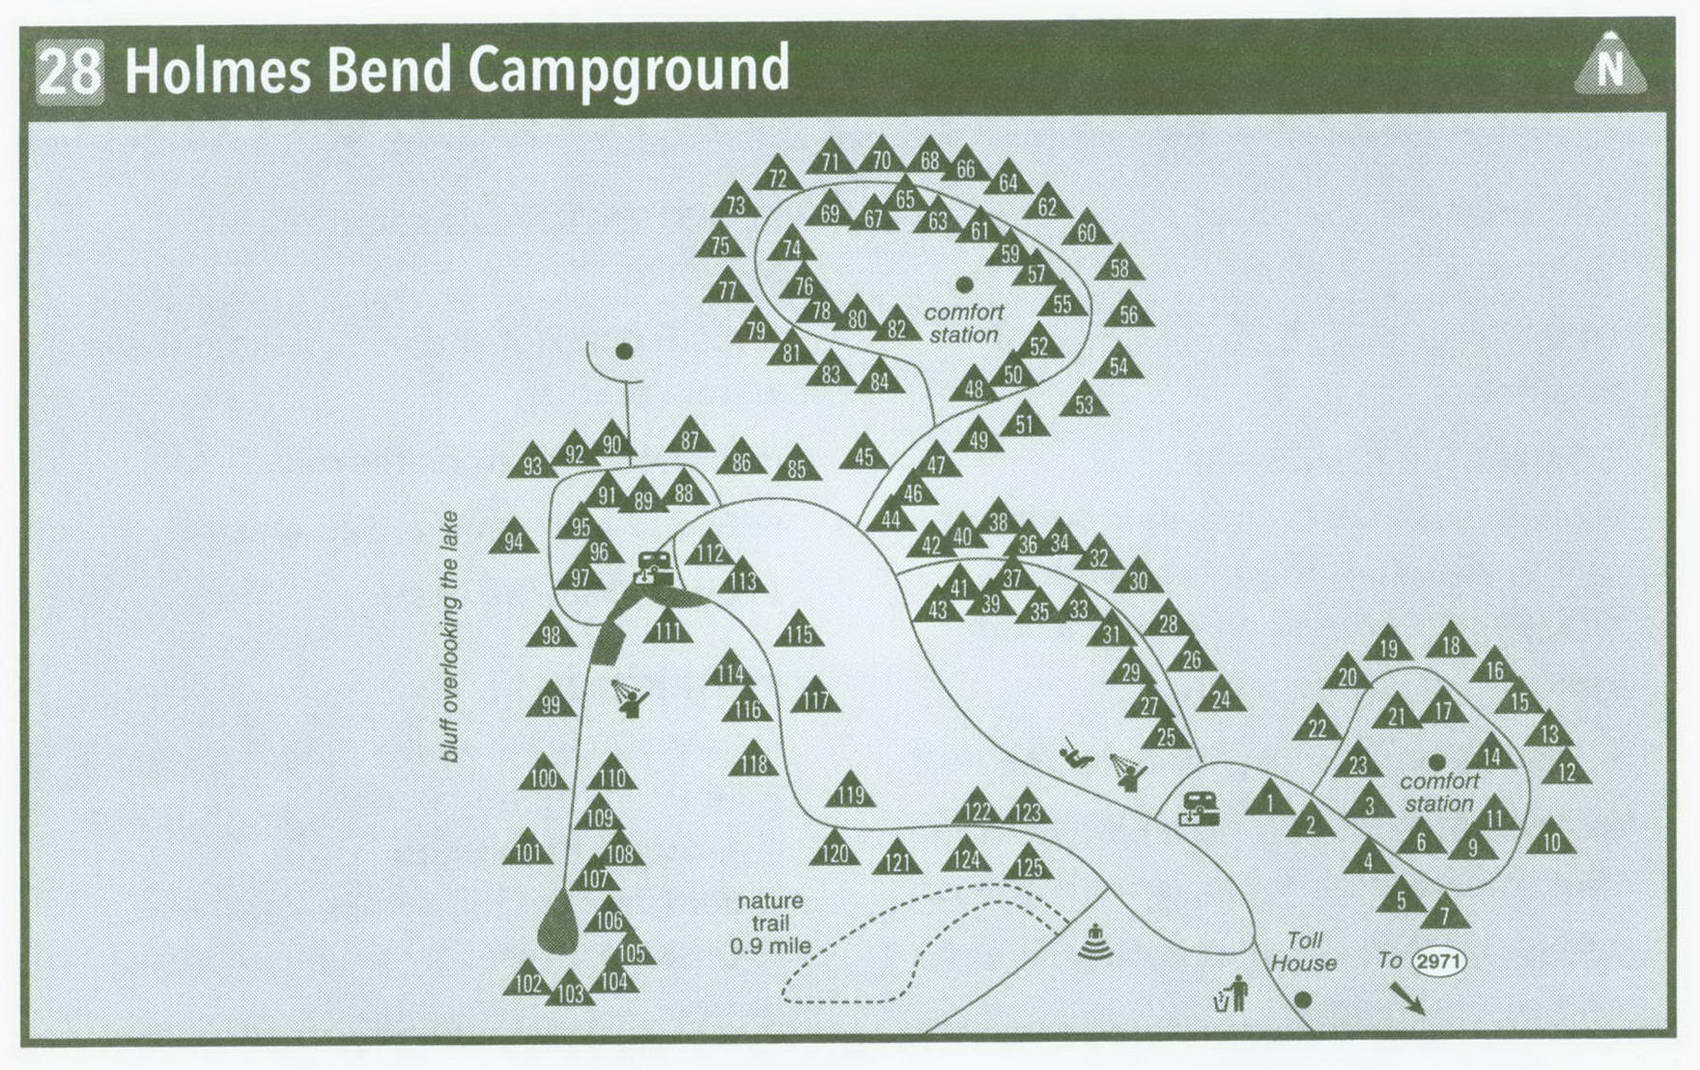 Holmes Bend Campground Map Hot Sex Picture 1858